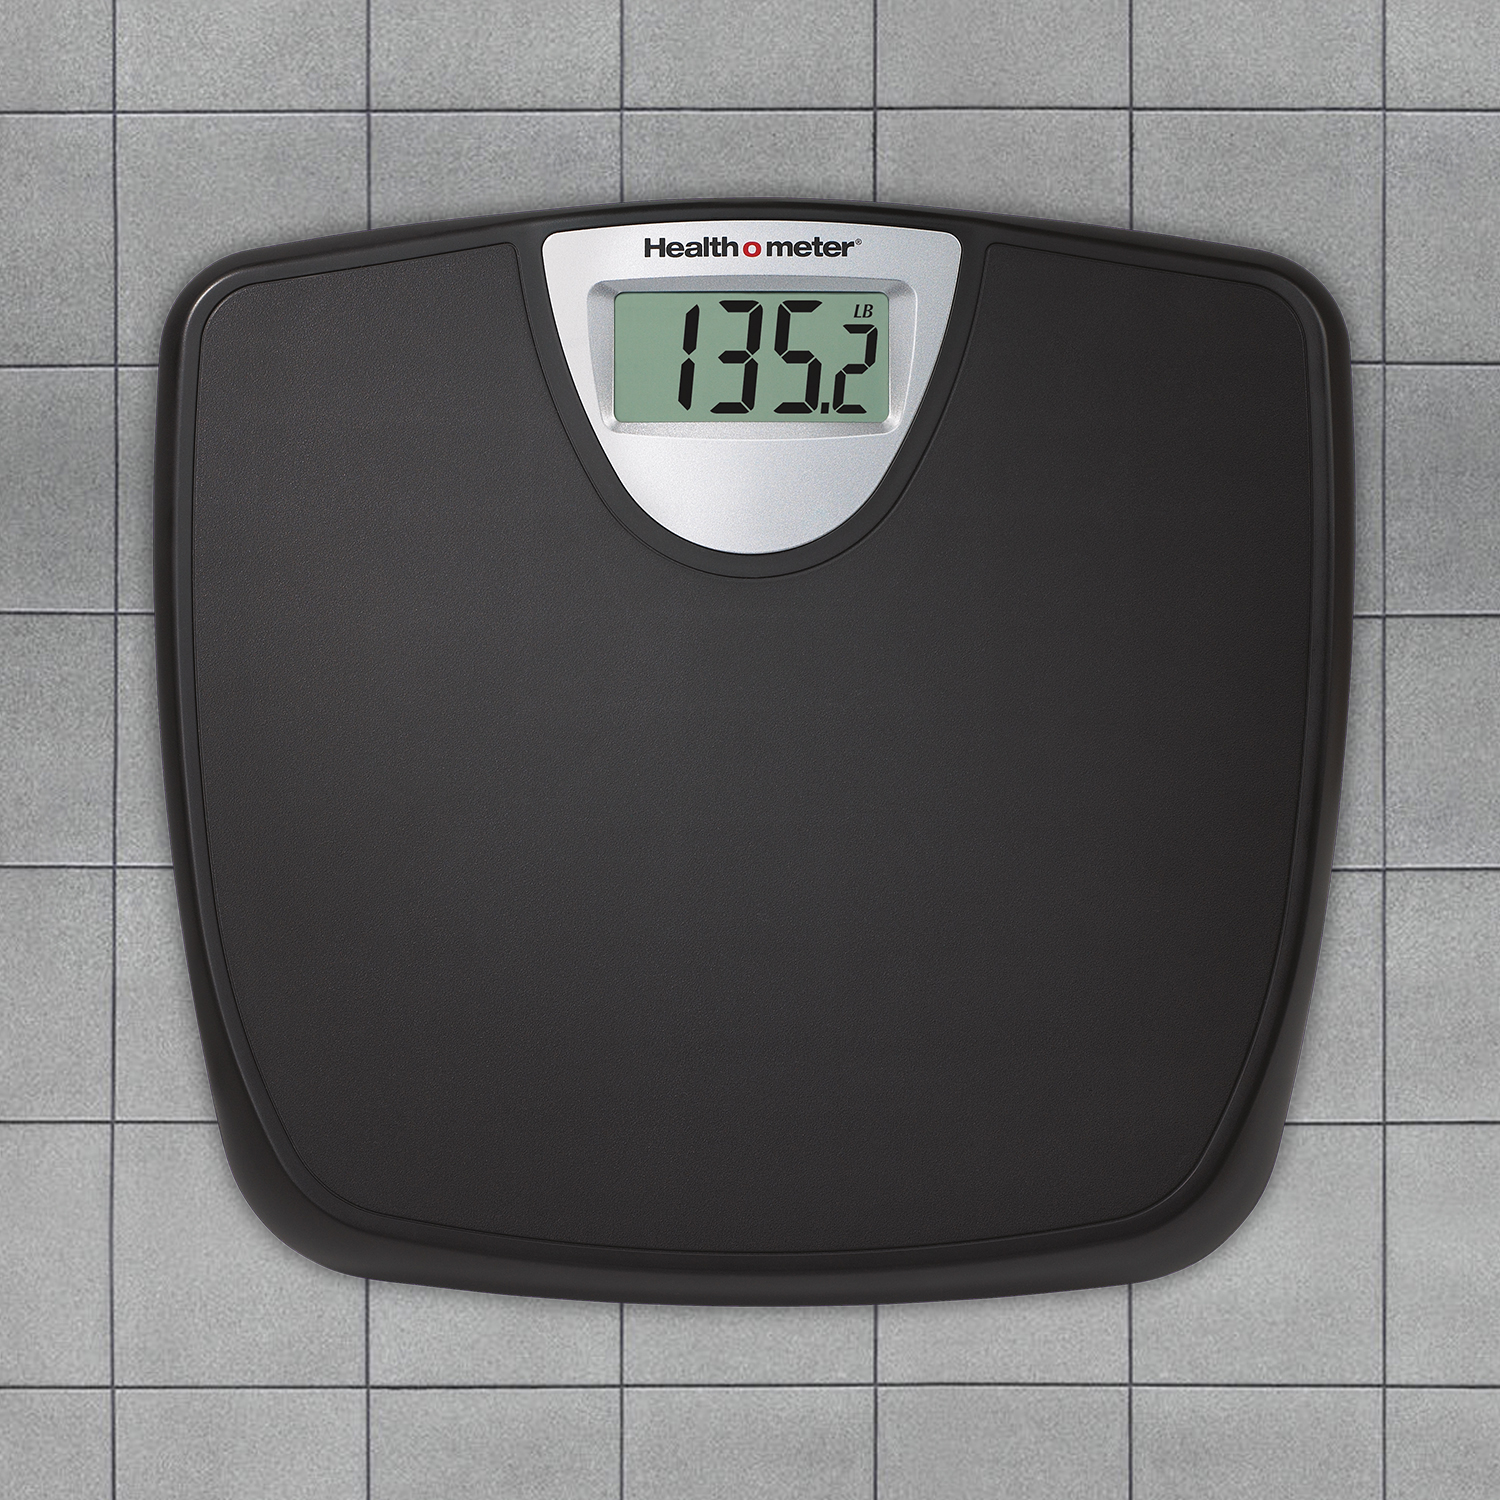 Health O Meter Scale | Weight Tracking Digital Bathroom Scale, Black - image 4 of 10